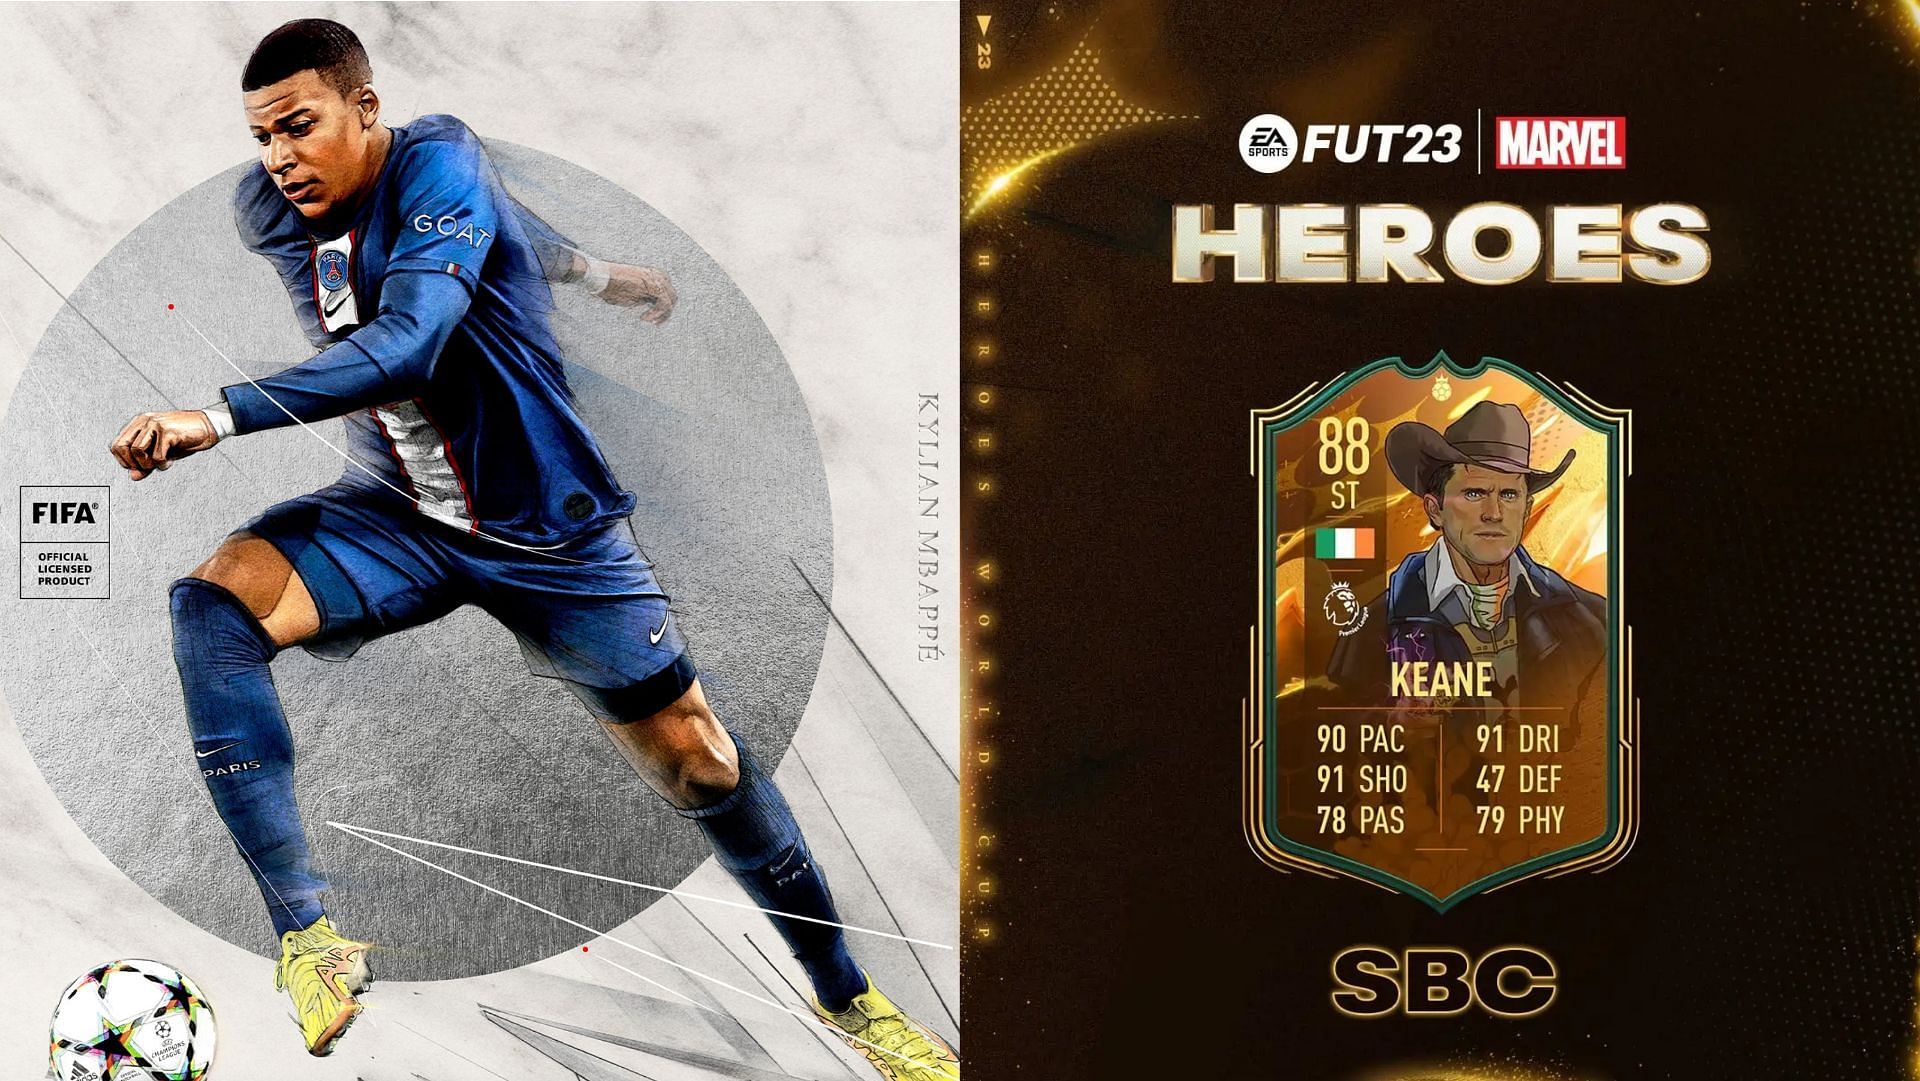 A special Robbie Keane card can now be obtained in the game (Images via EA Sports)